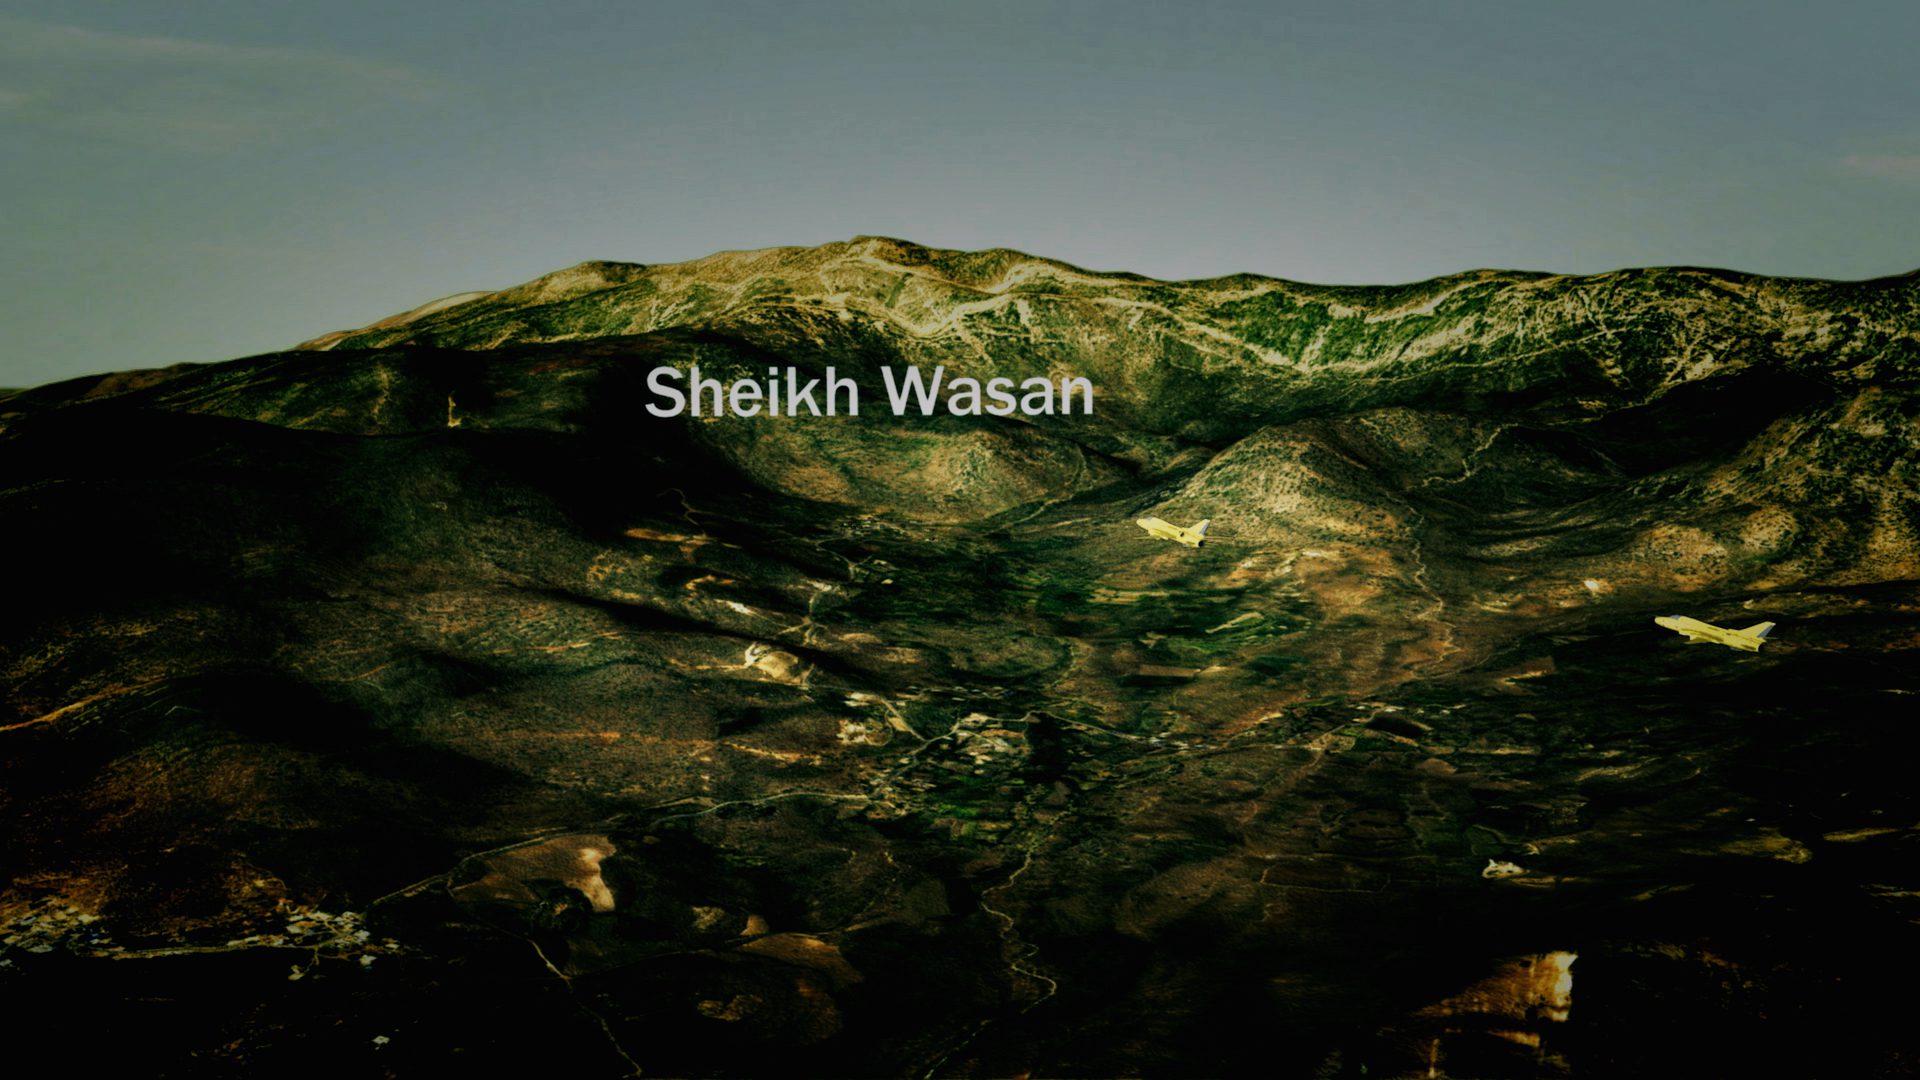 In this animation Iraqi jets drop chemical bombs on the villages of Sheikh Wasan in the Balisan valley, to the northeast of Erbil. The attack took place in the evening of 16 April 1987 as villagers returned home from the fields. The Iraqis bombed the village at supper time to maximise casualties. 